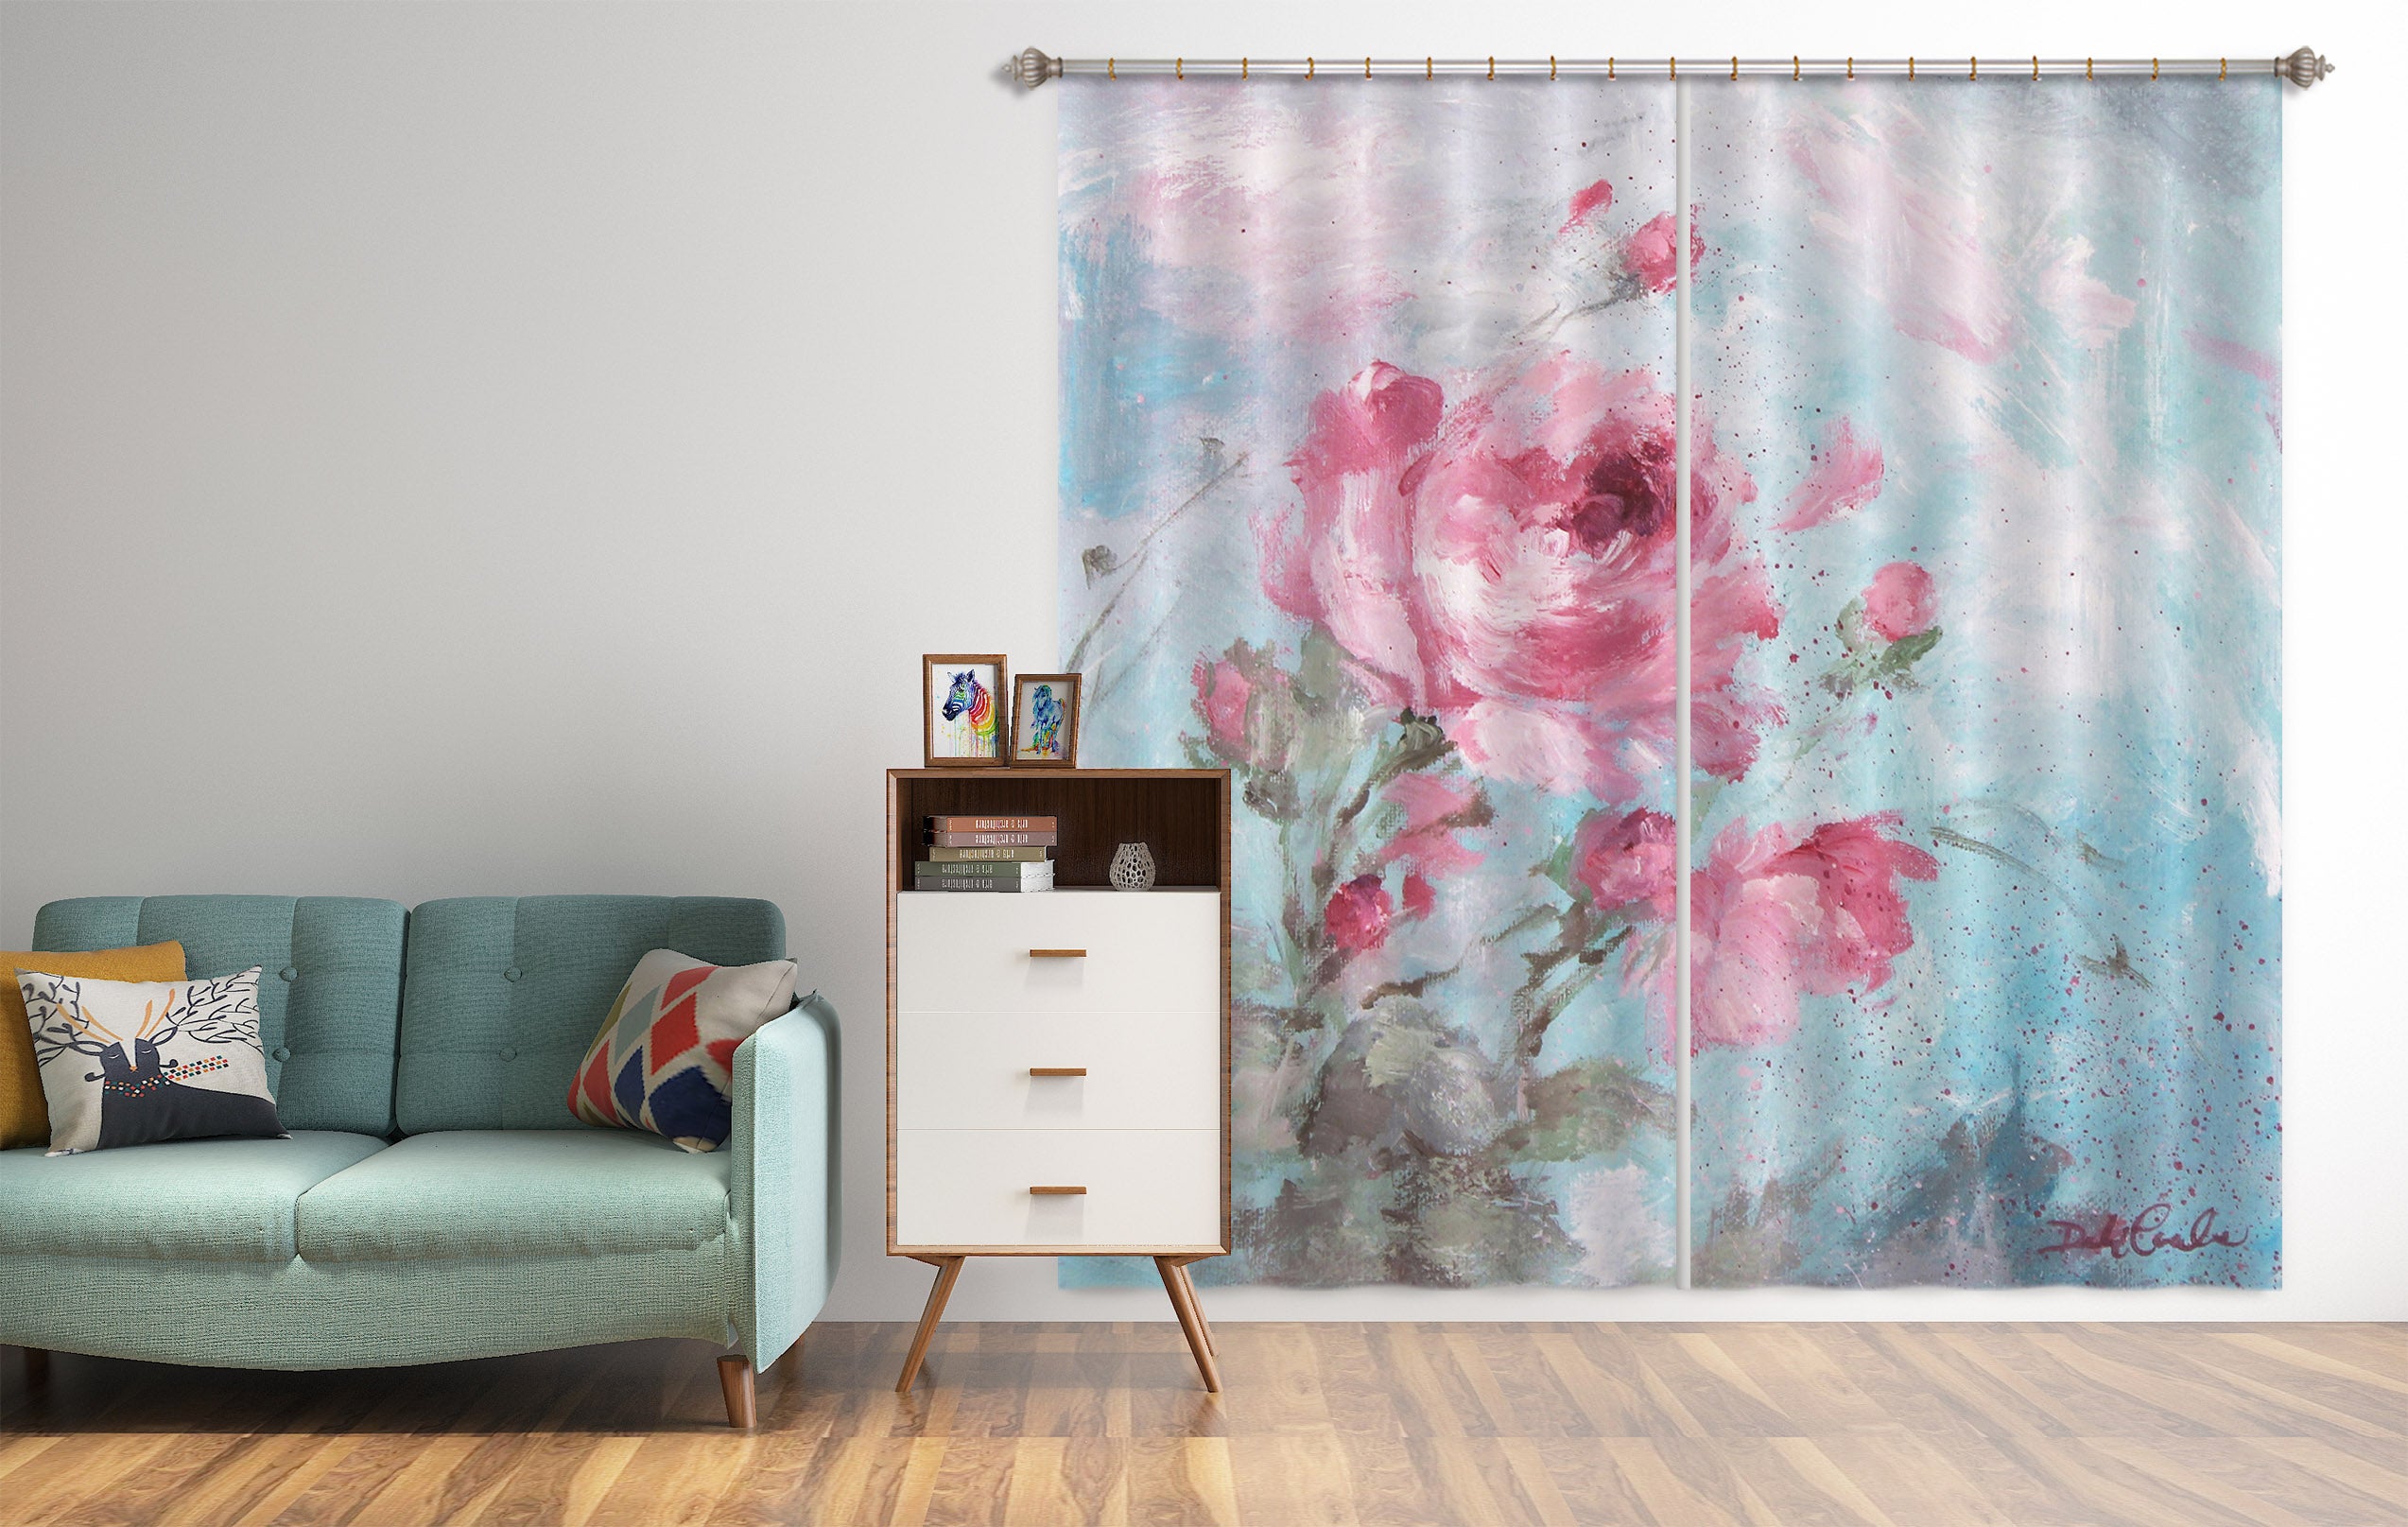 3D Pink Rose Flowers 2211 Debi Coules Curtain Curtains Drapes